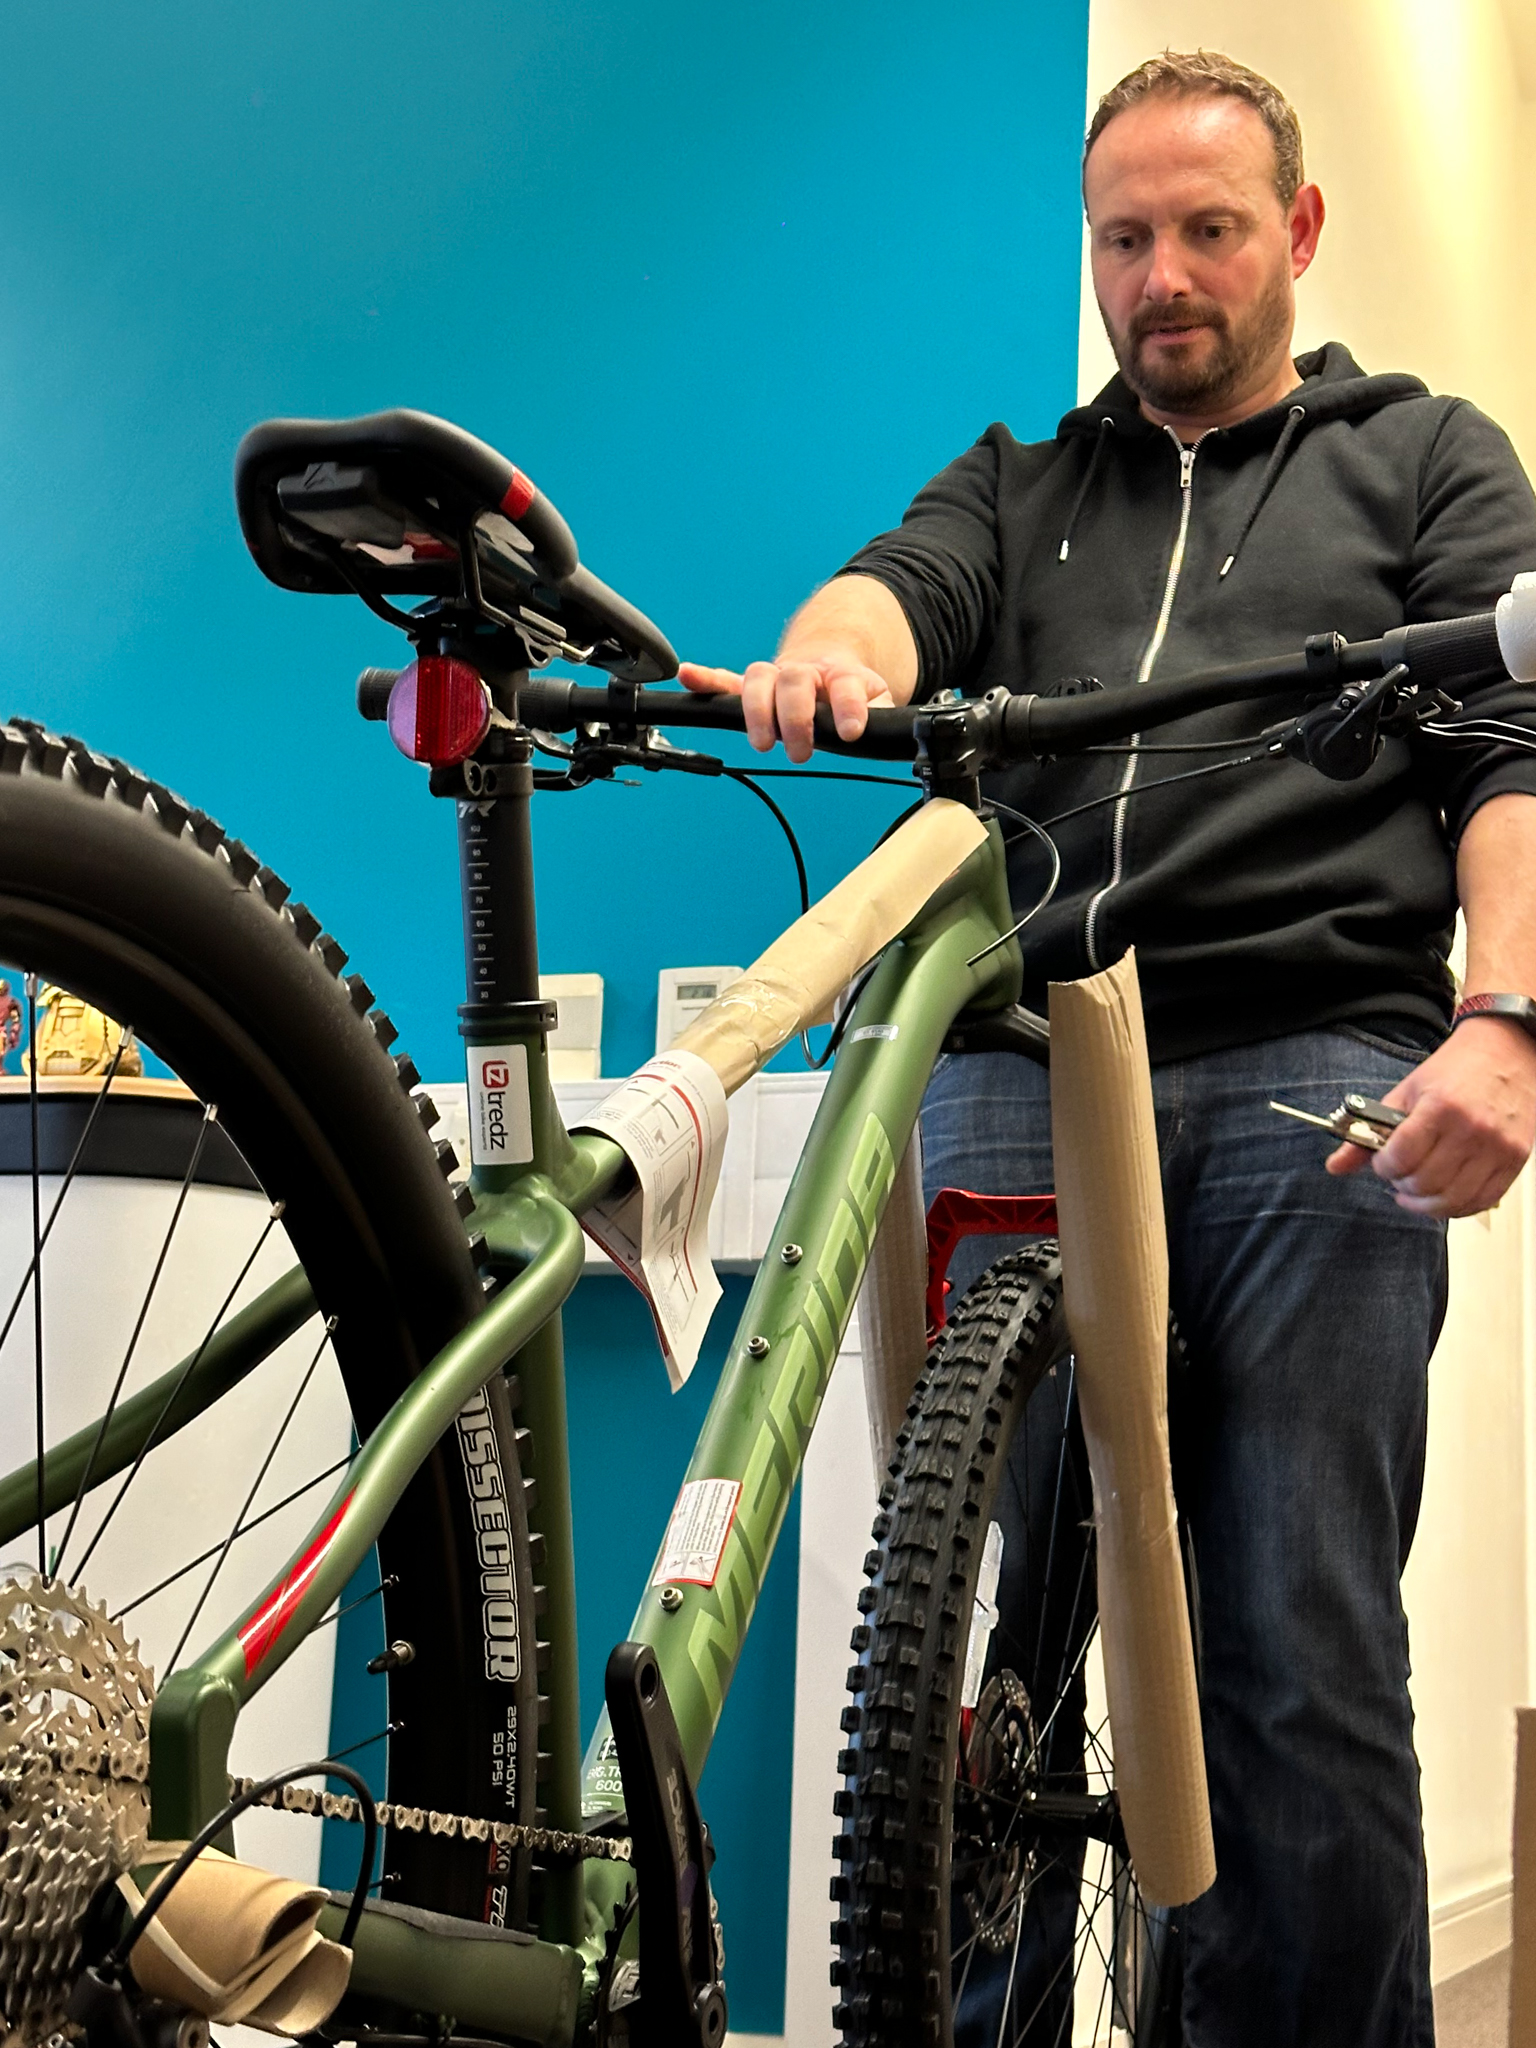 PEOPLE AND PLANET: INTRODUCING OUR NEW BIKE2WORK SCHEME